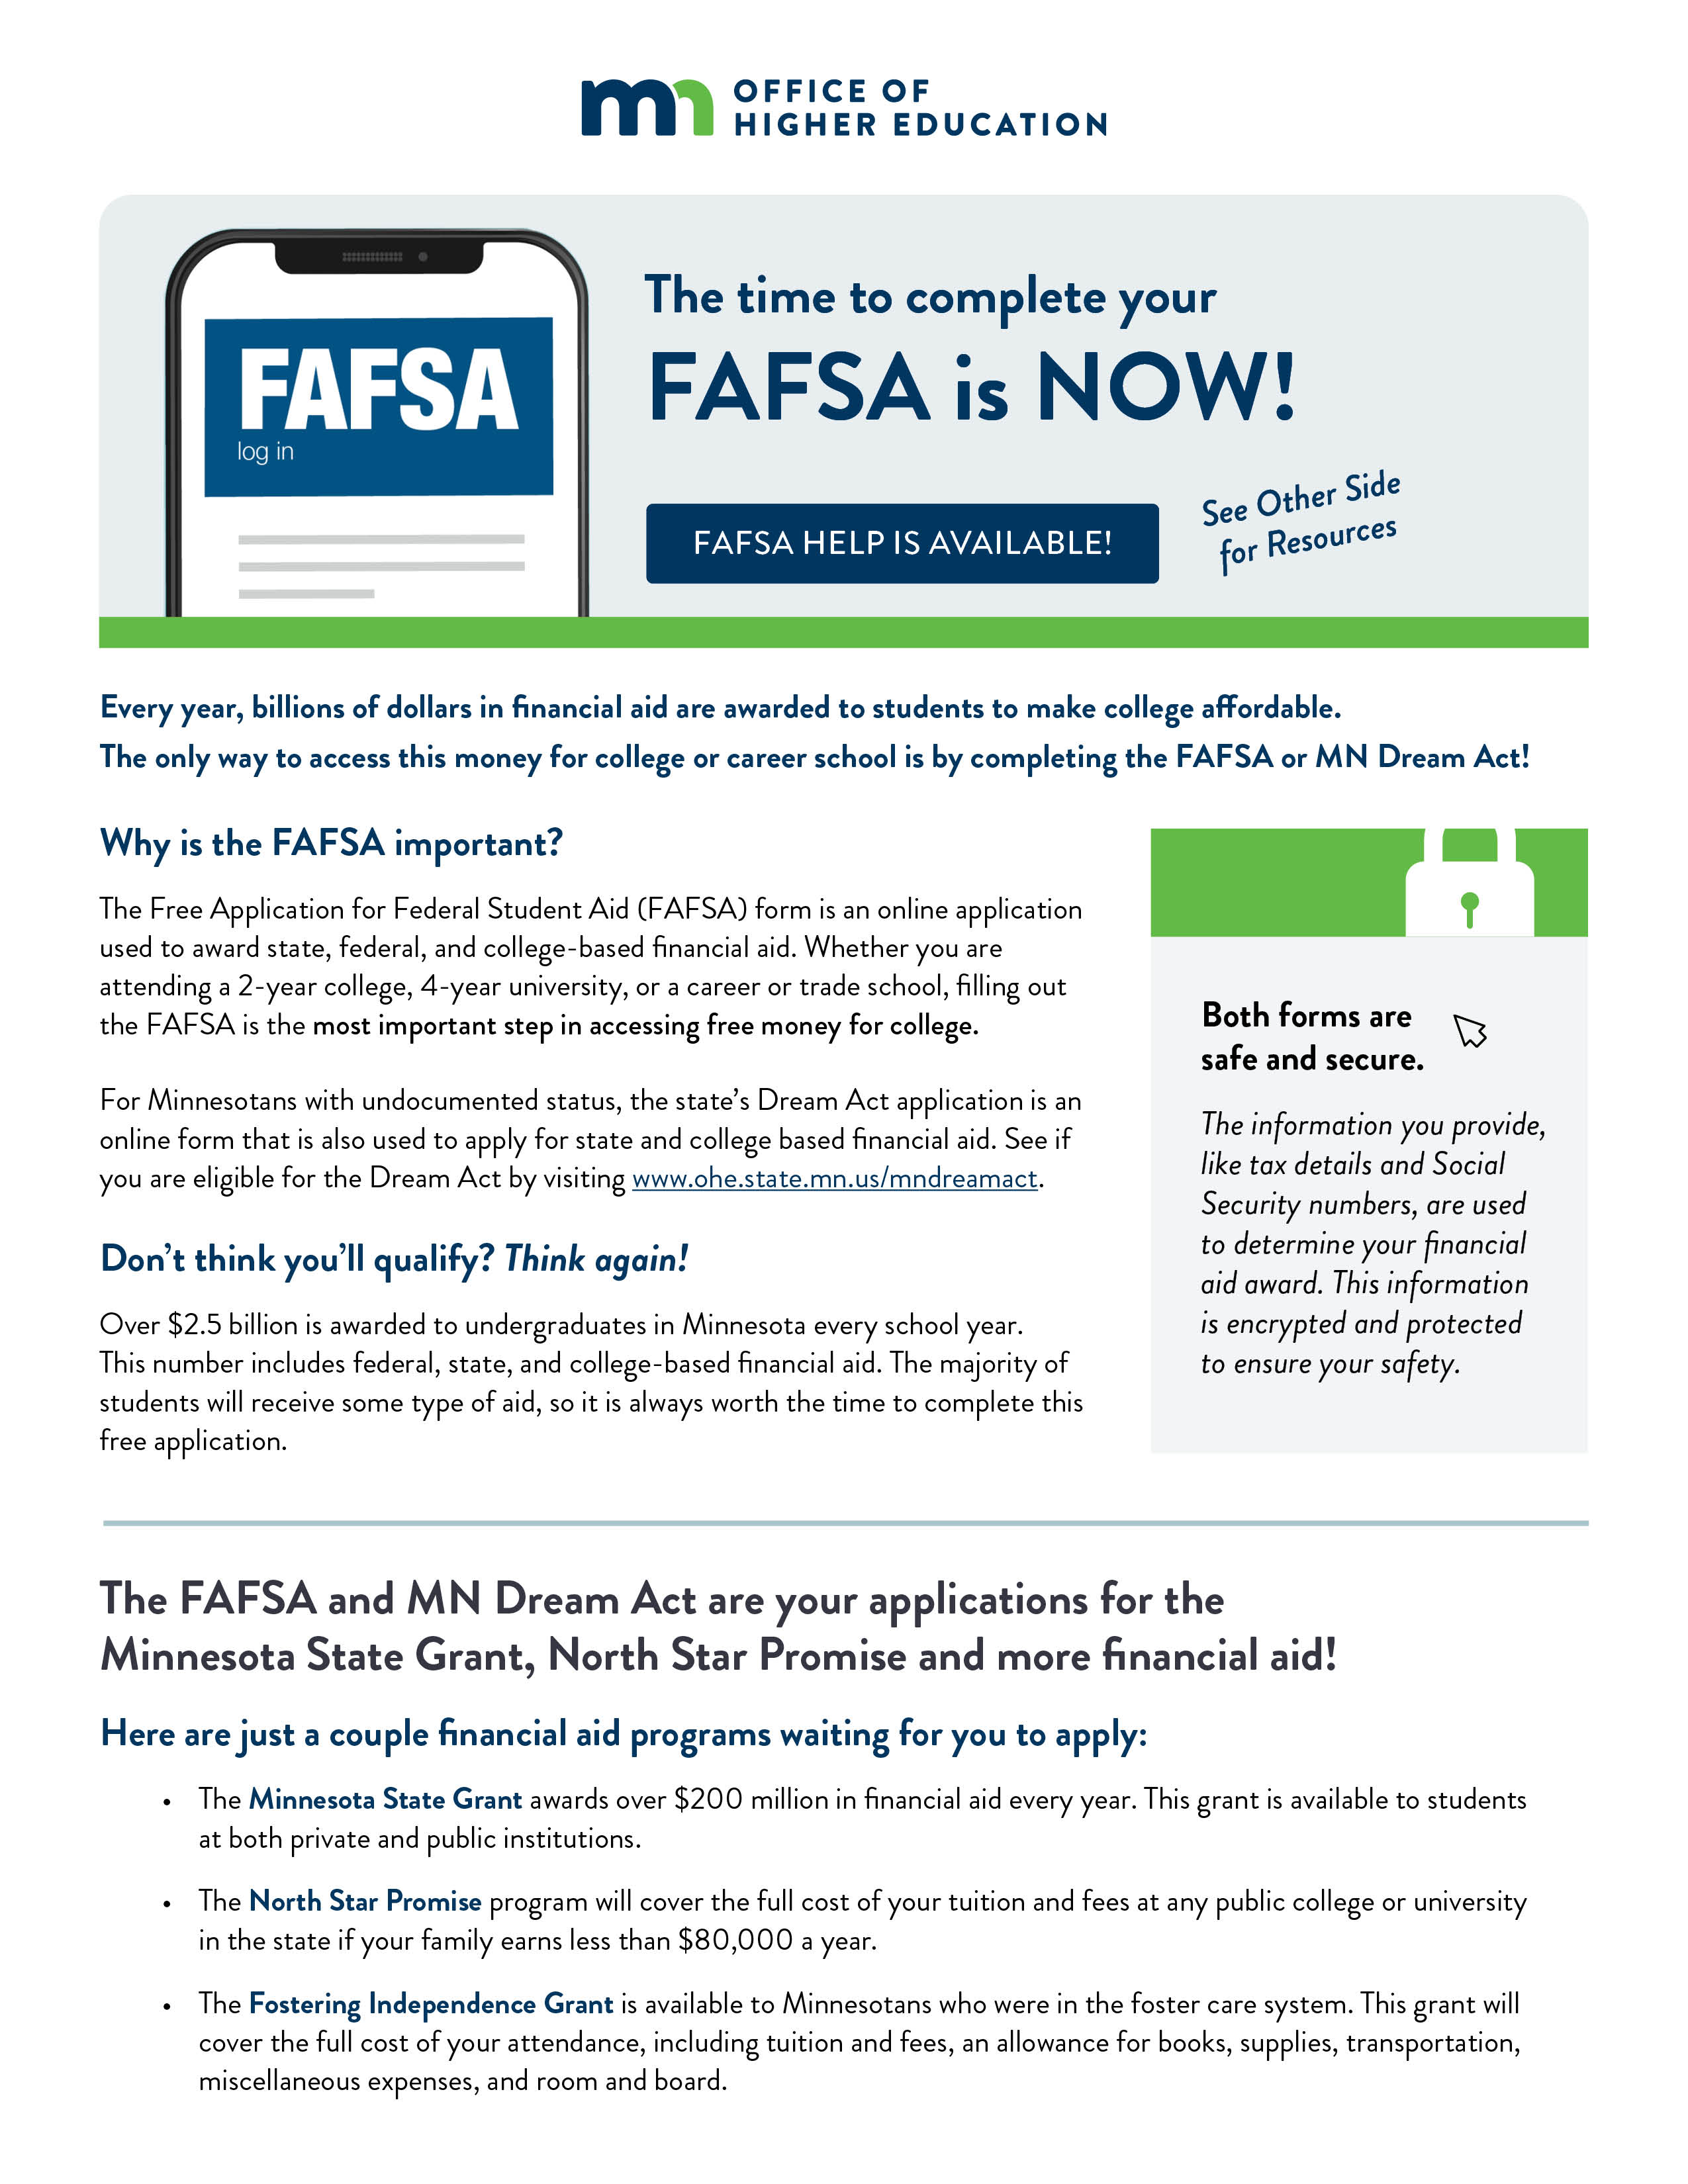 Preview of Complete FAFSA Now flyer. Click to read flyer.